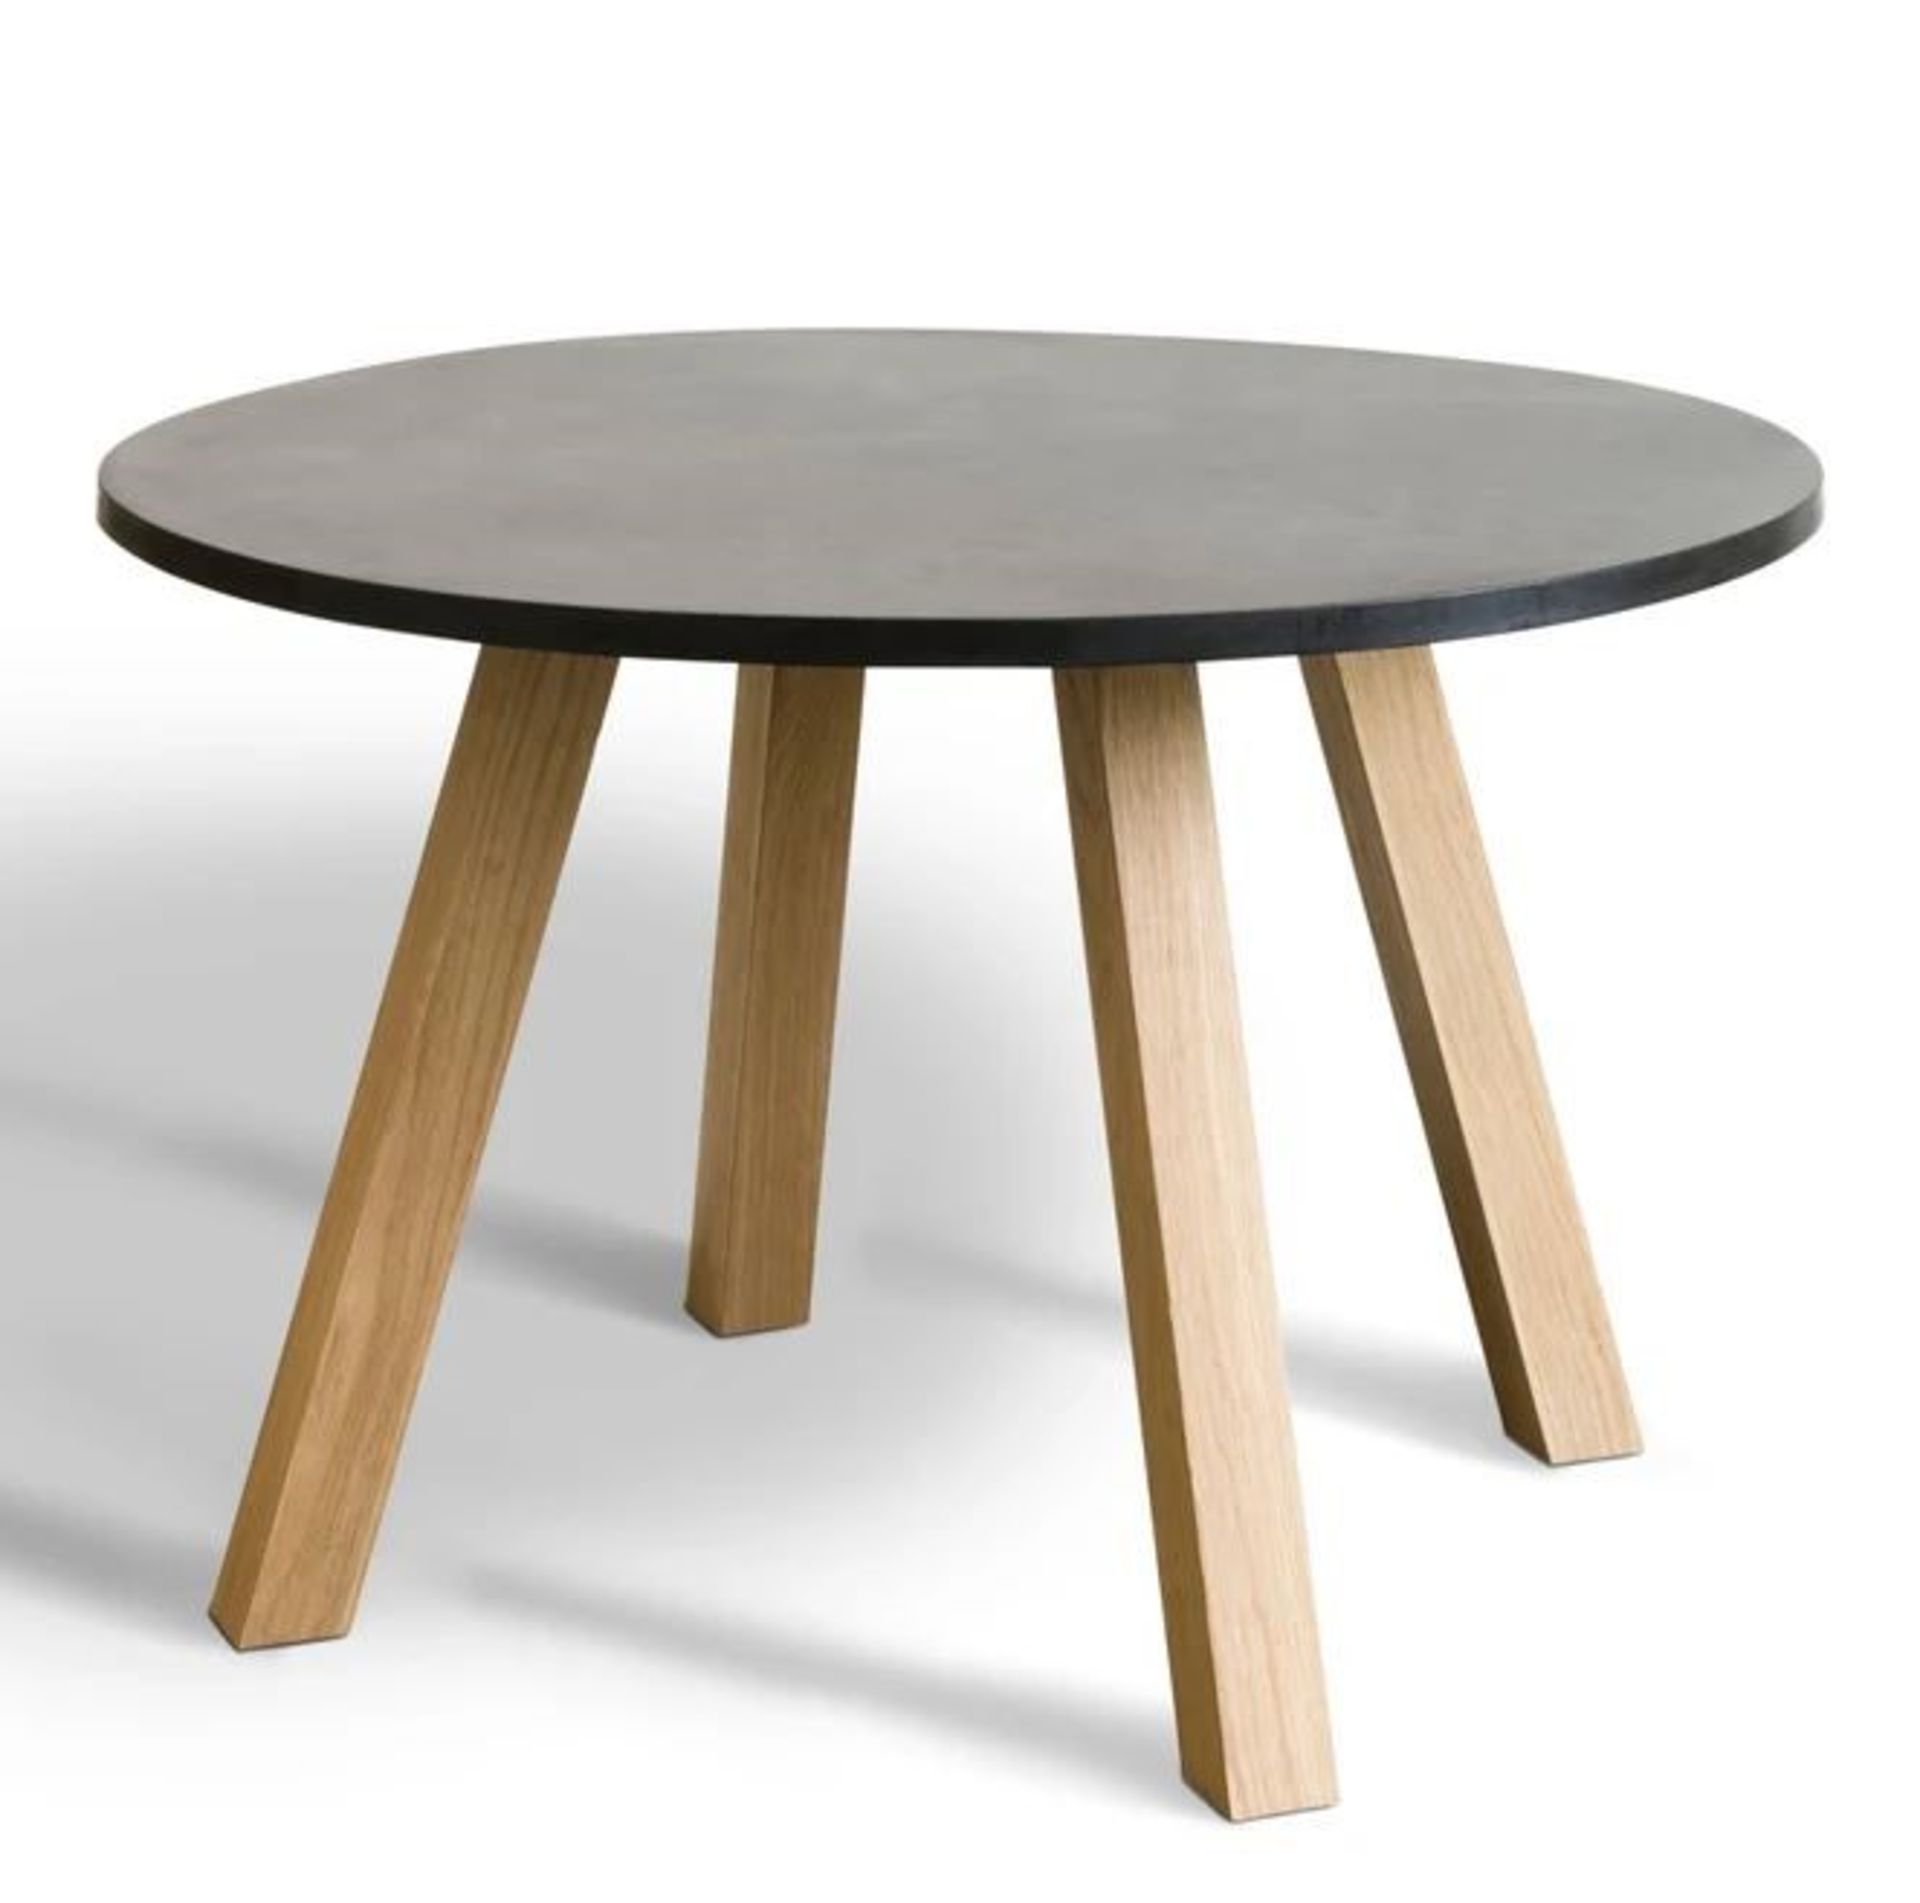 LA REDOUTE JACOB CONTEMPORARY ROUND OAK & RESIN TABLE WITH REVERSIBLE BASE (SEATS 6)